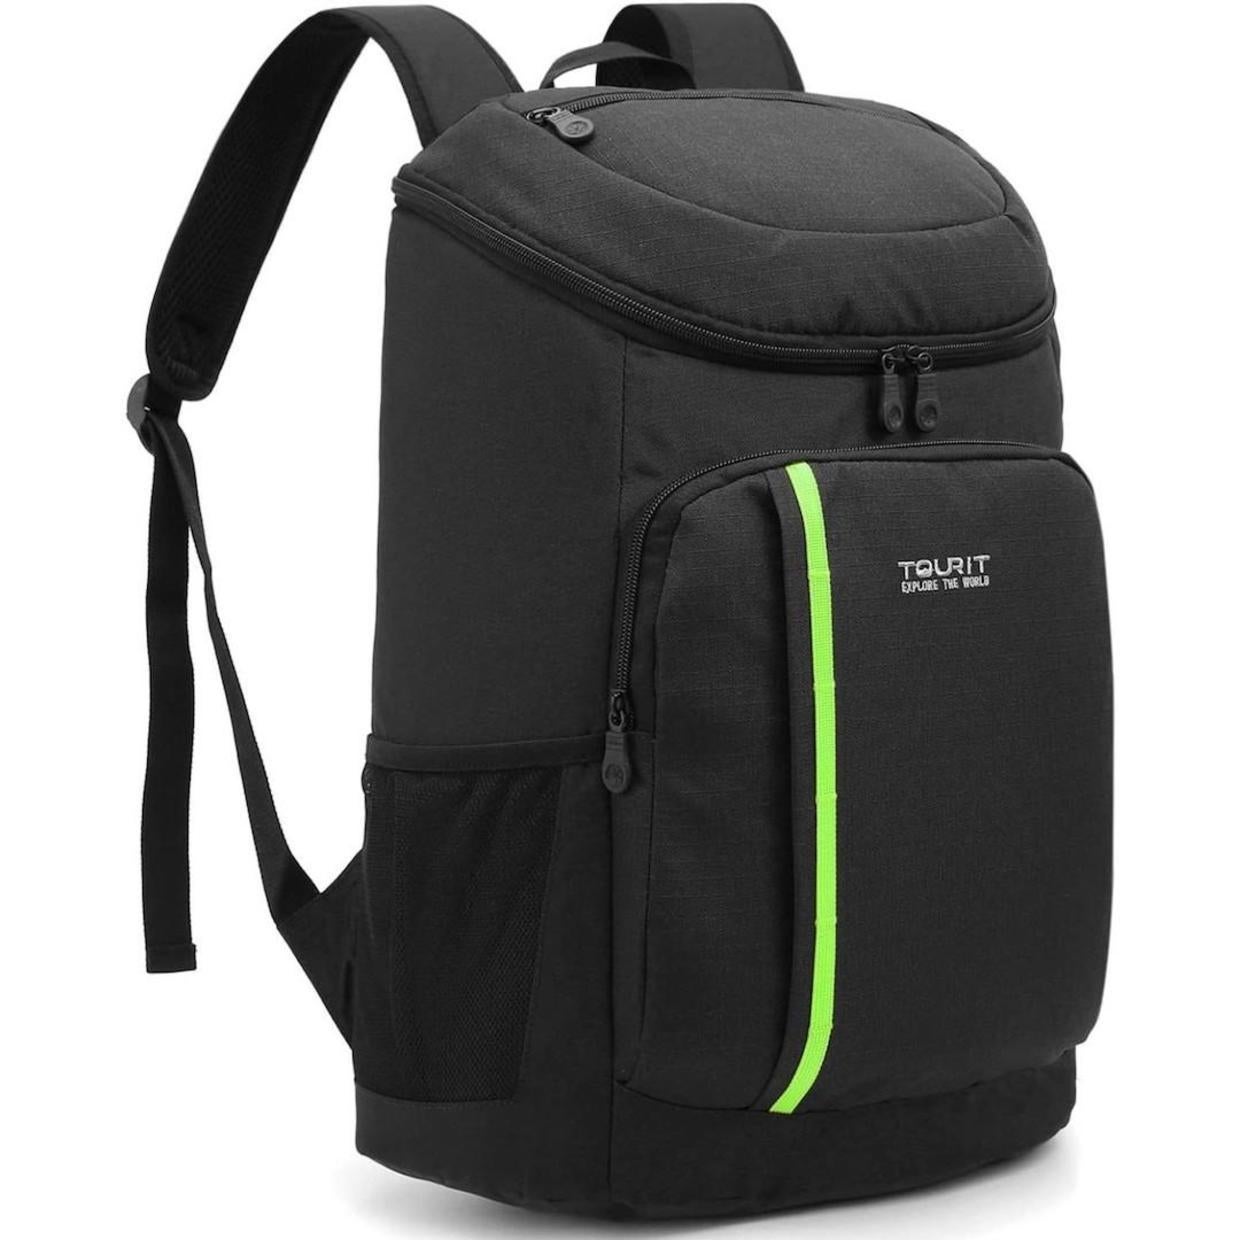 Tourit 30-can insulated backpack